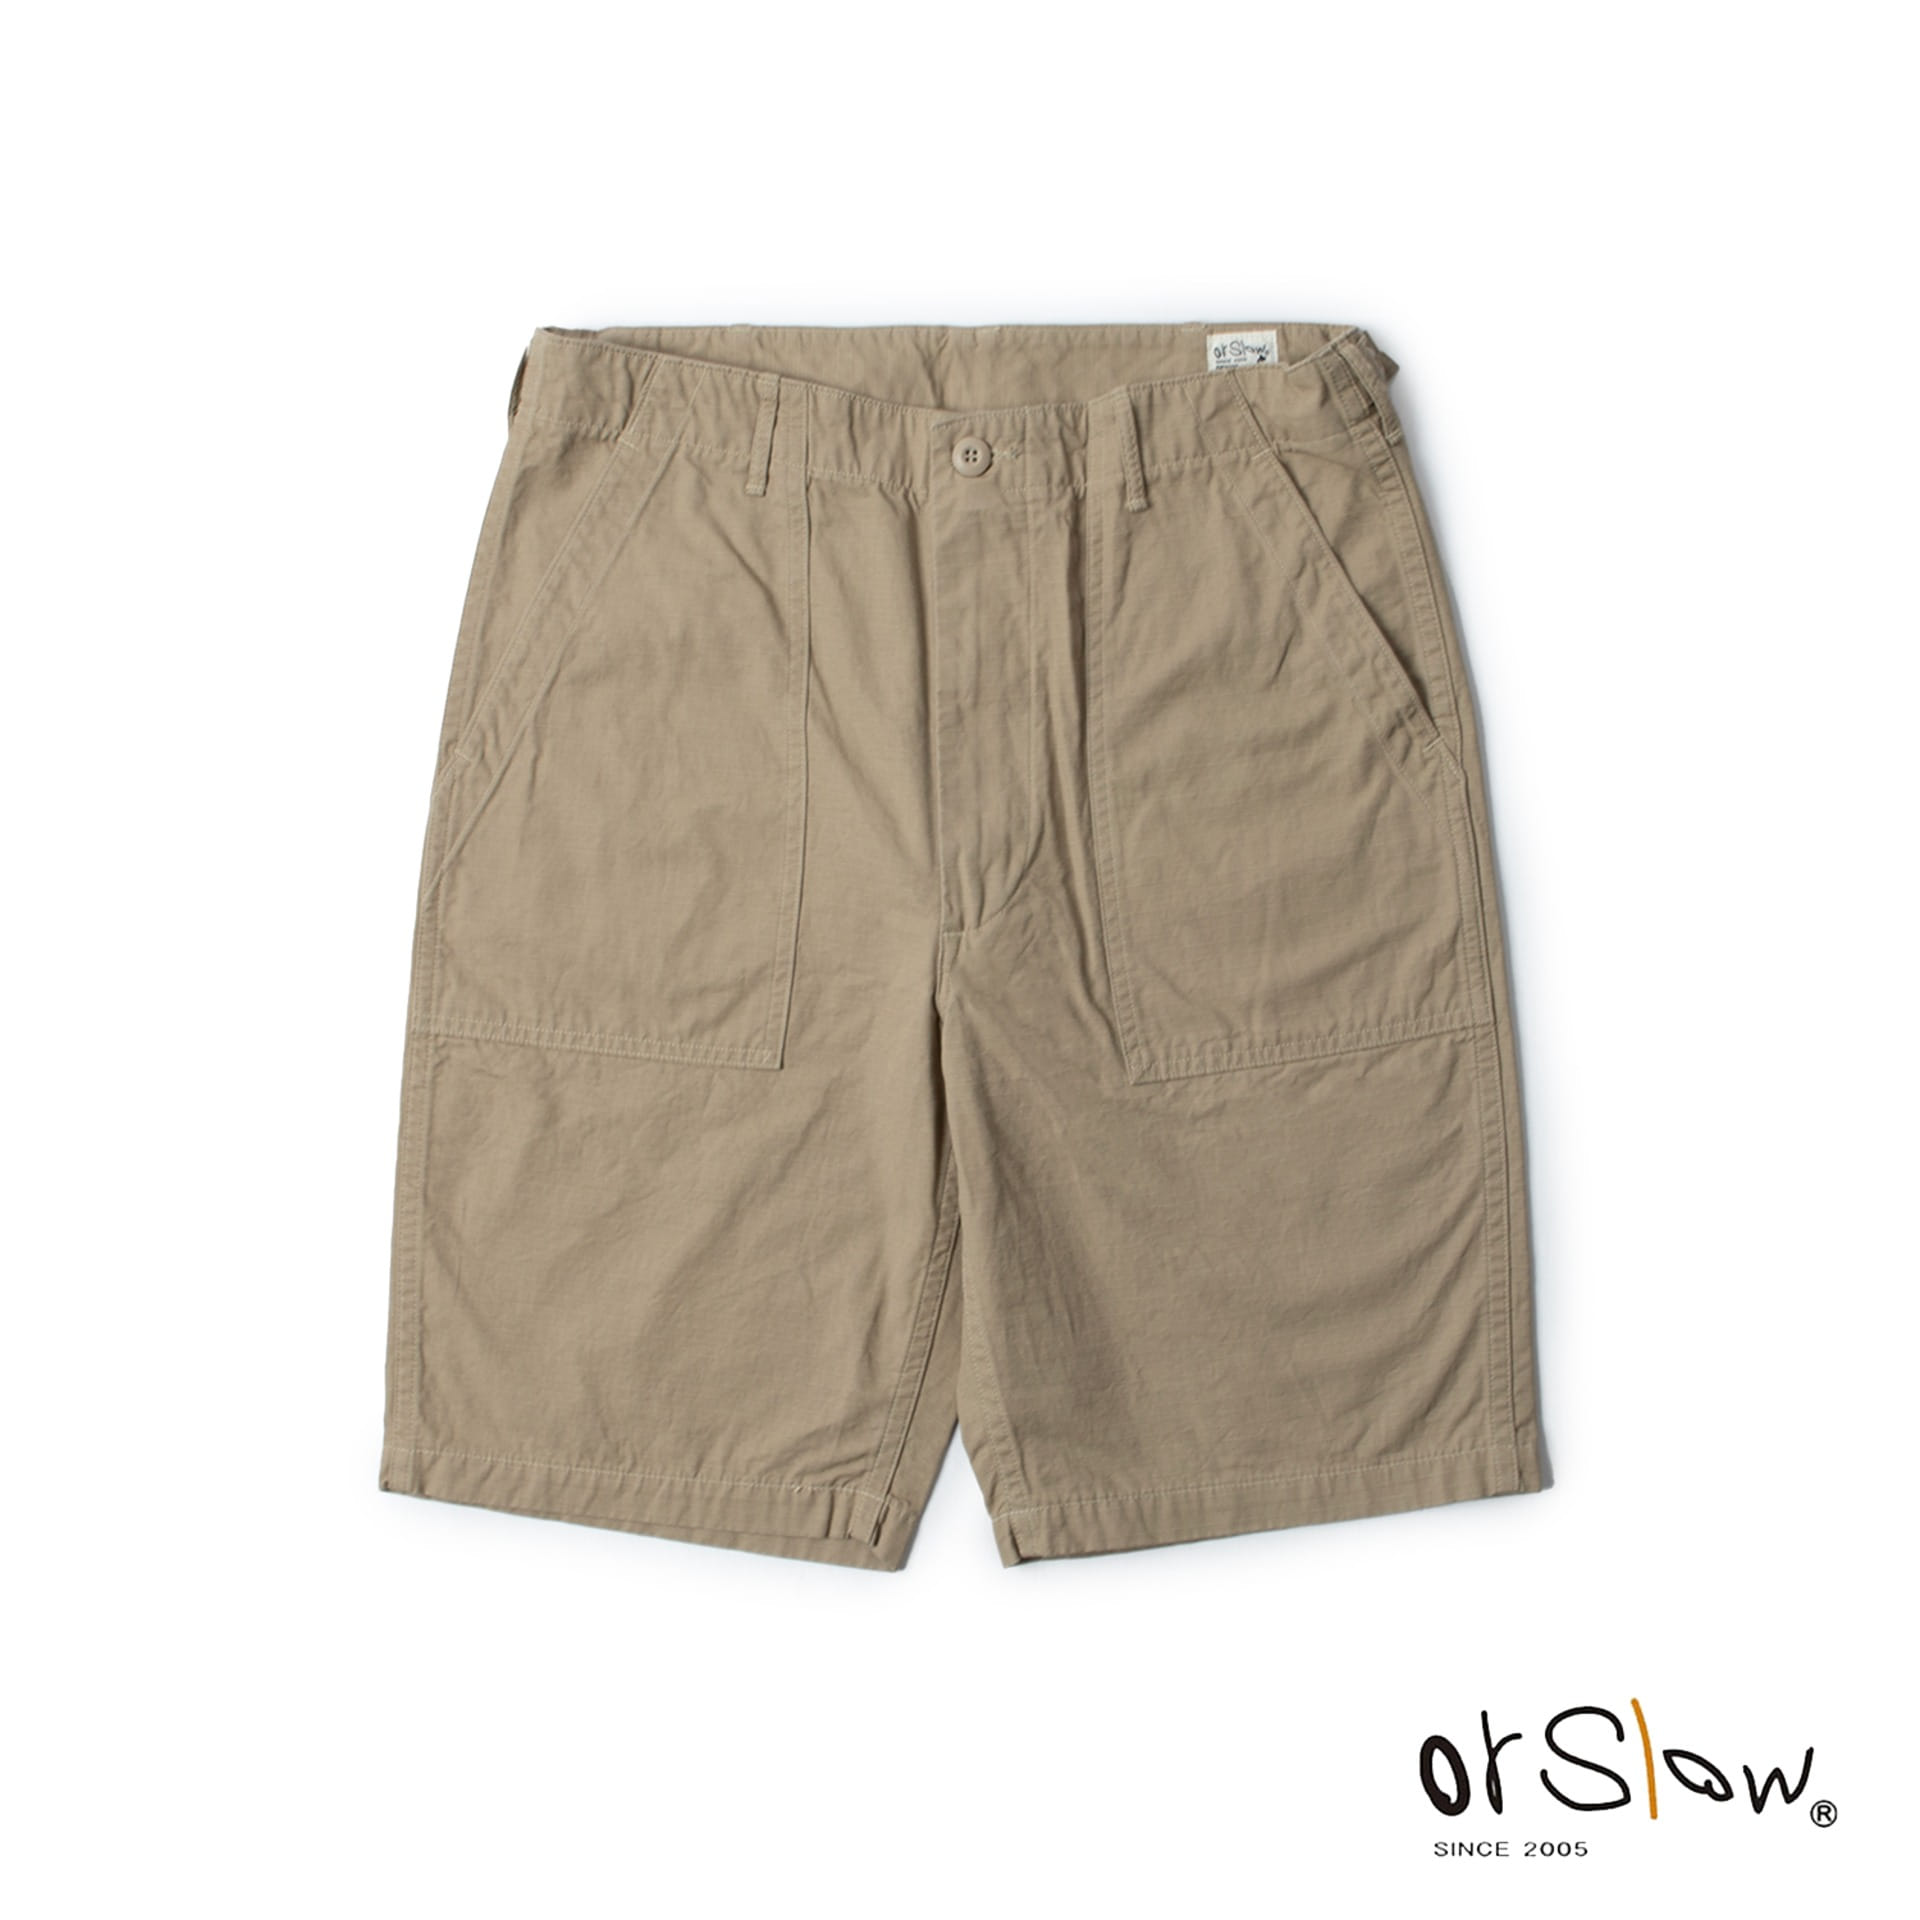 US ARMY FATIGUE SHORTS RIPSTOP (Beige)